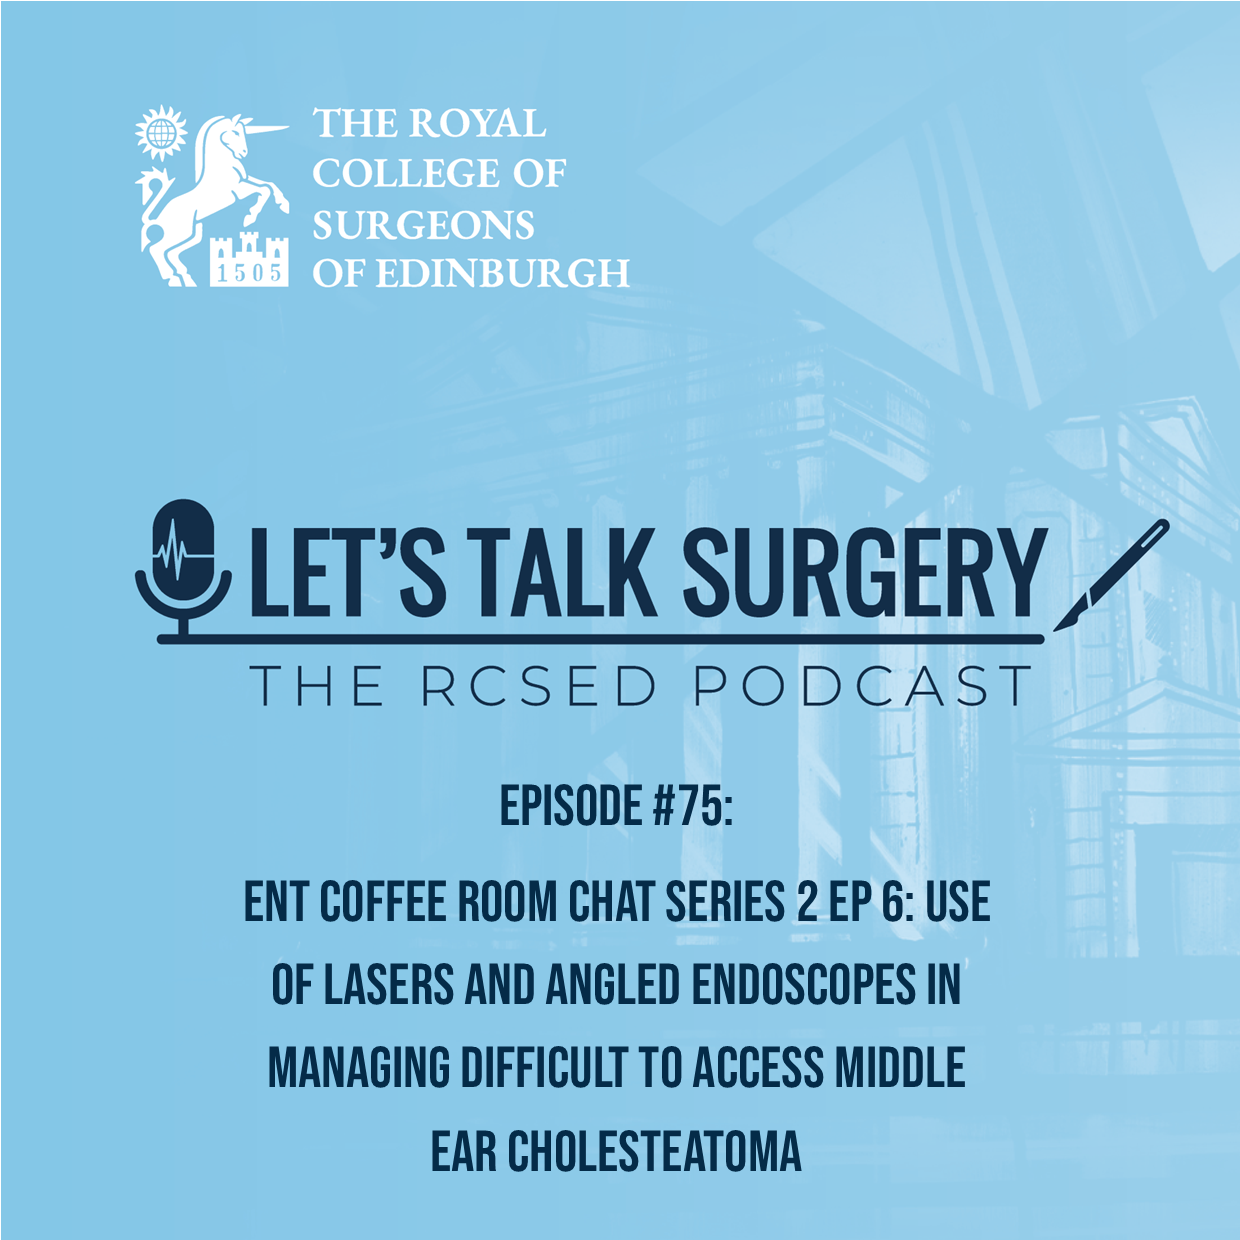 ENT Coffee Room Chat Series 2: Ep 6 - Use of lasers and angled endoscopes in managing difficult to access middle ear cholesteatoma